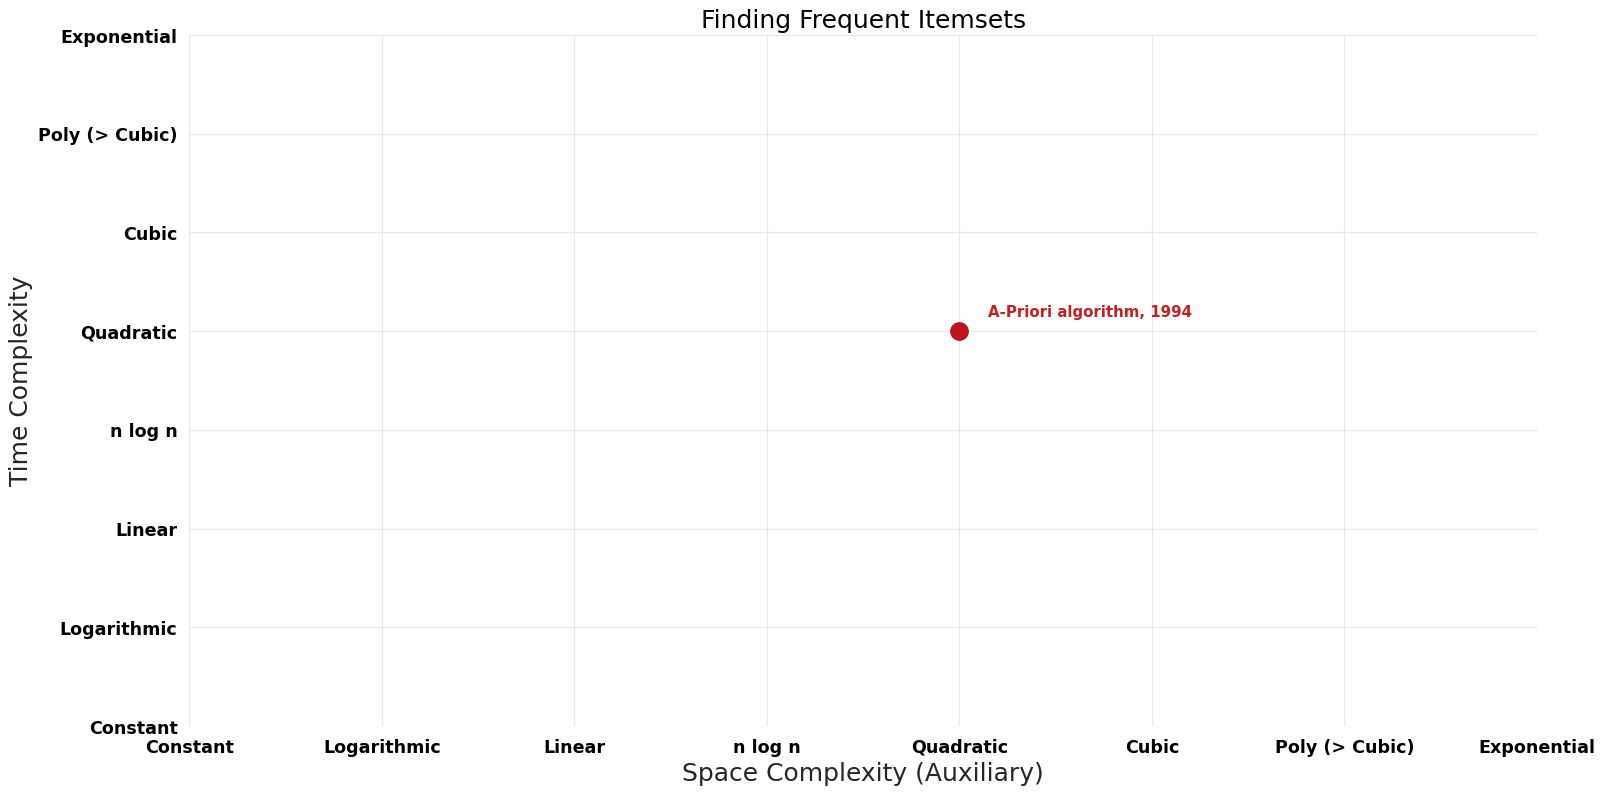 File:Finding Frequent Itemsets - Pareto Frontier.png